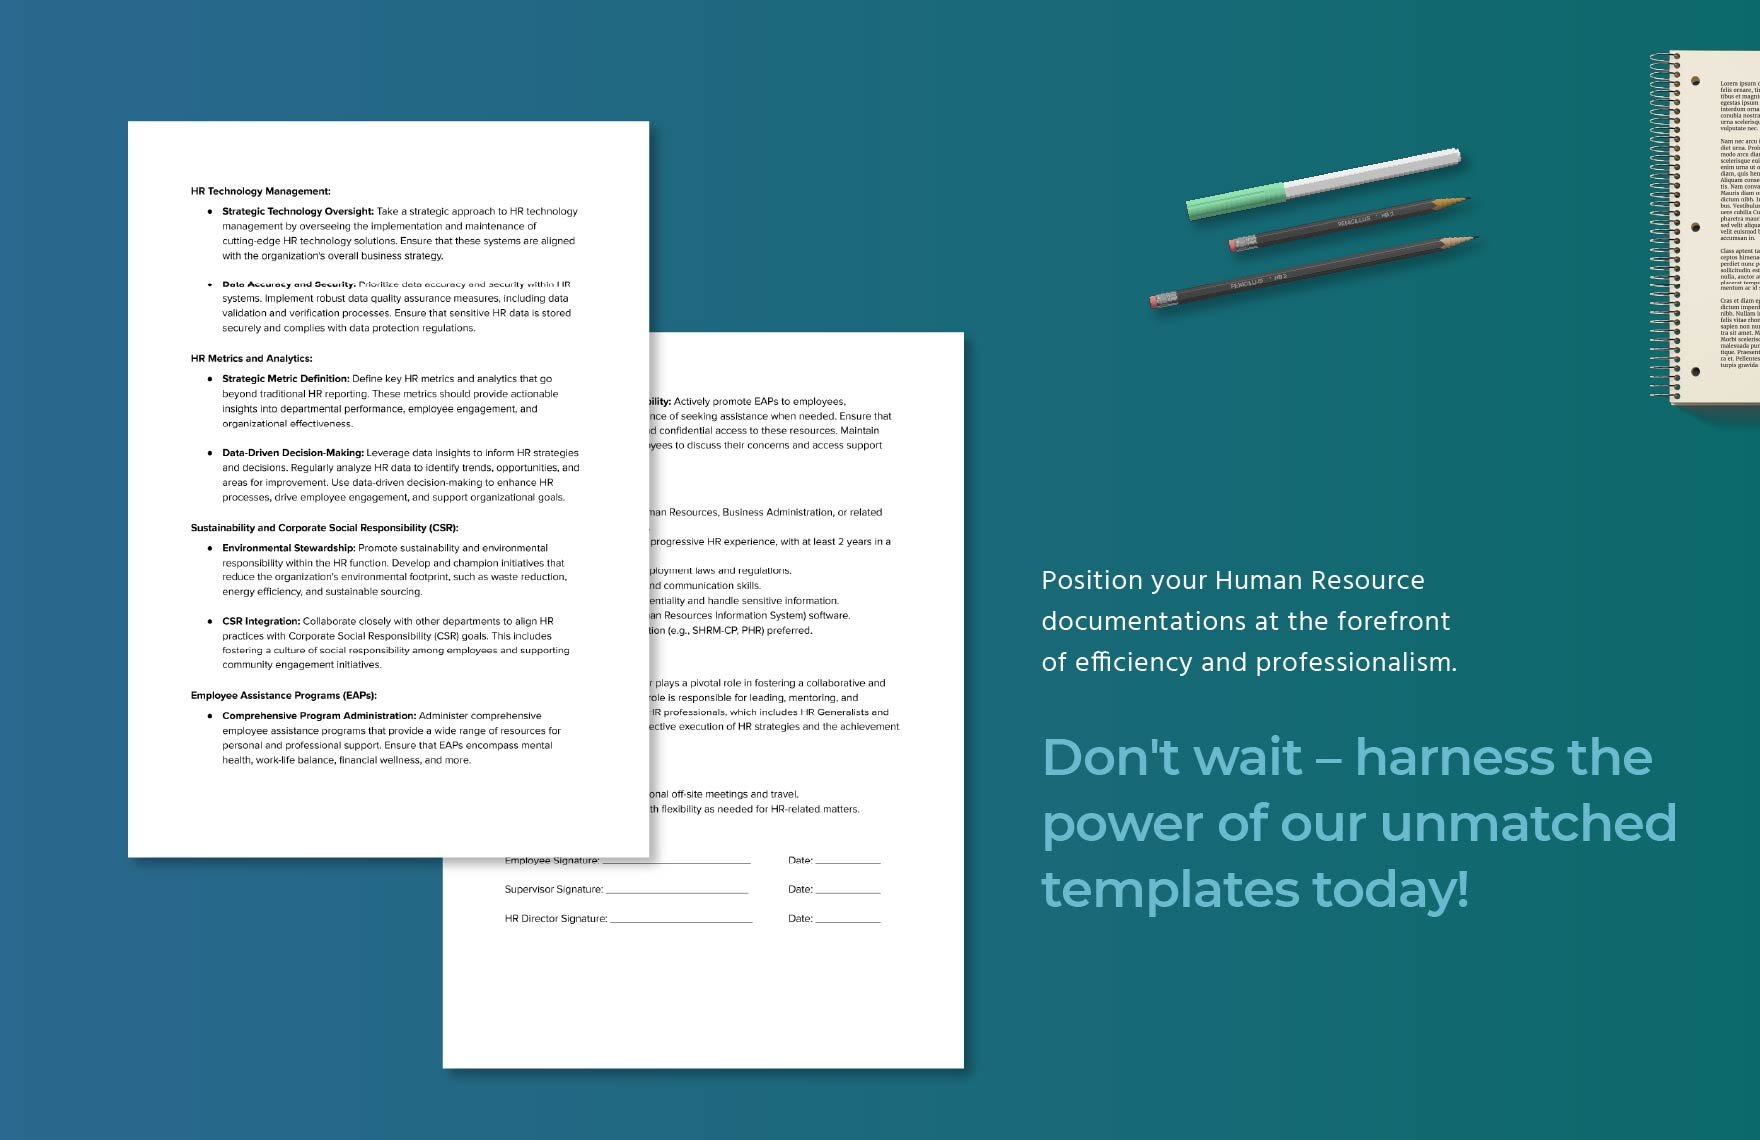 Role & Task Clarity Document HR Template